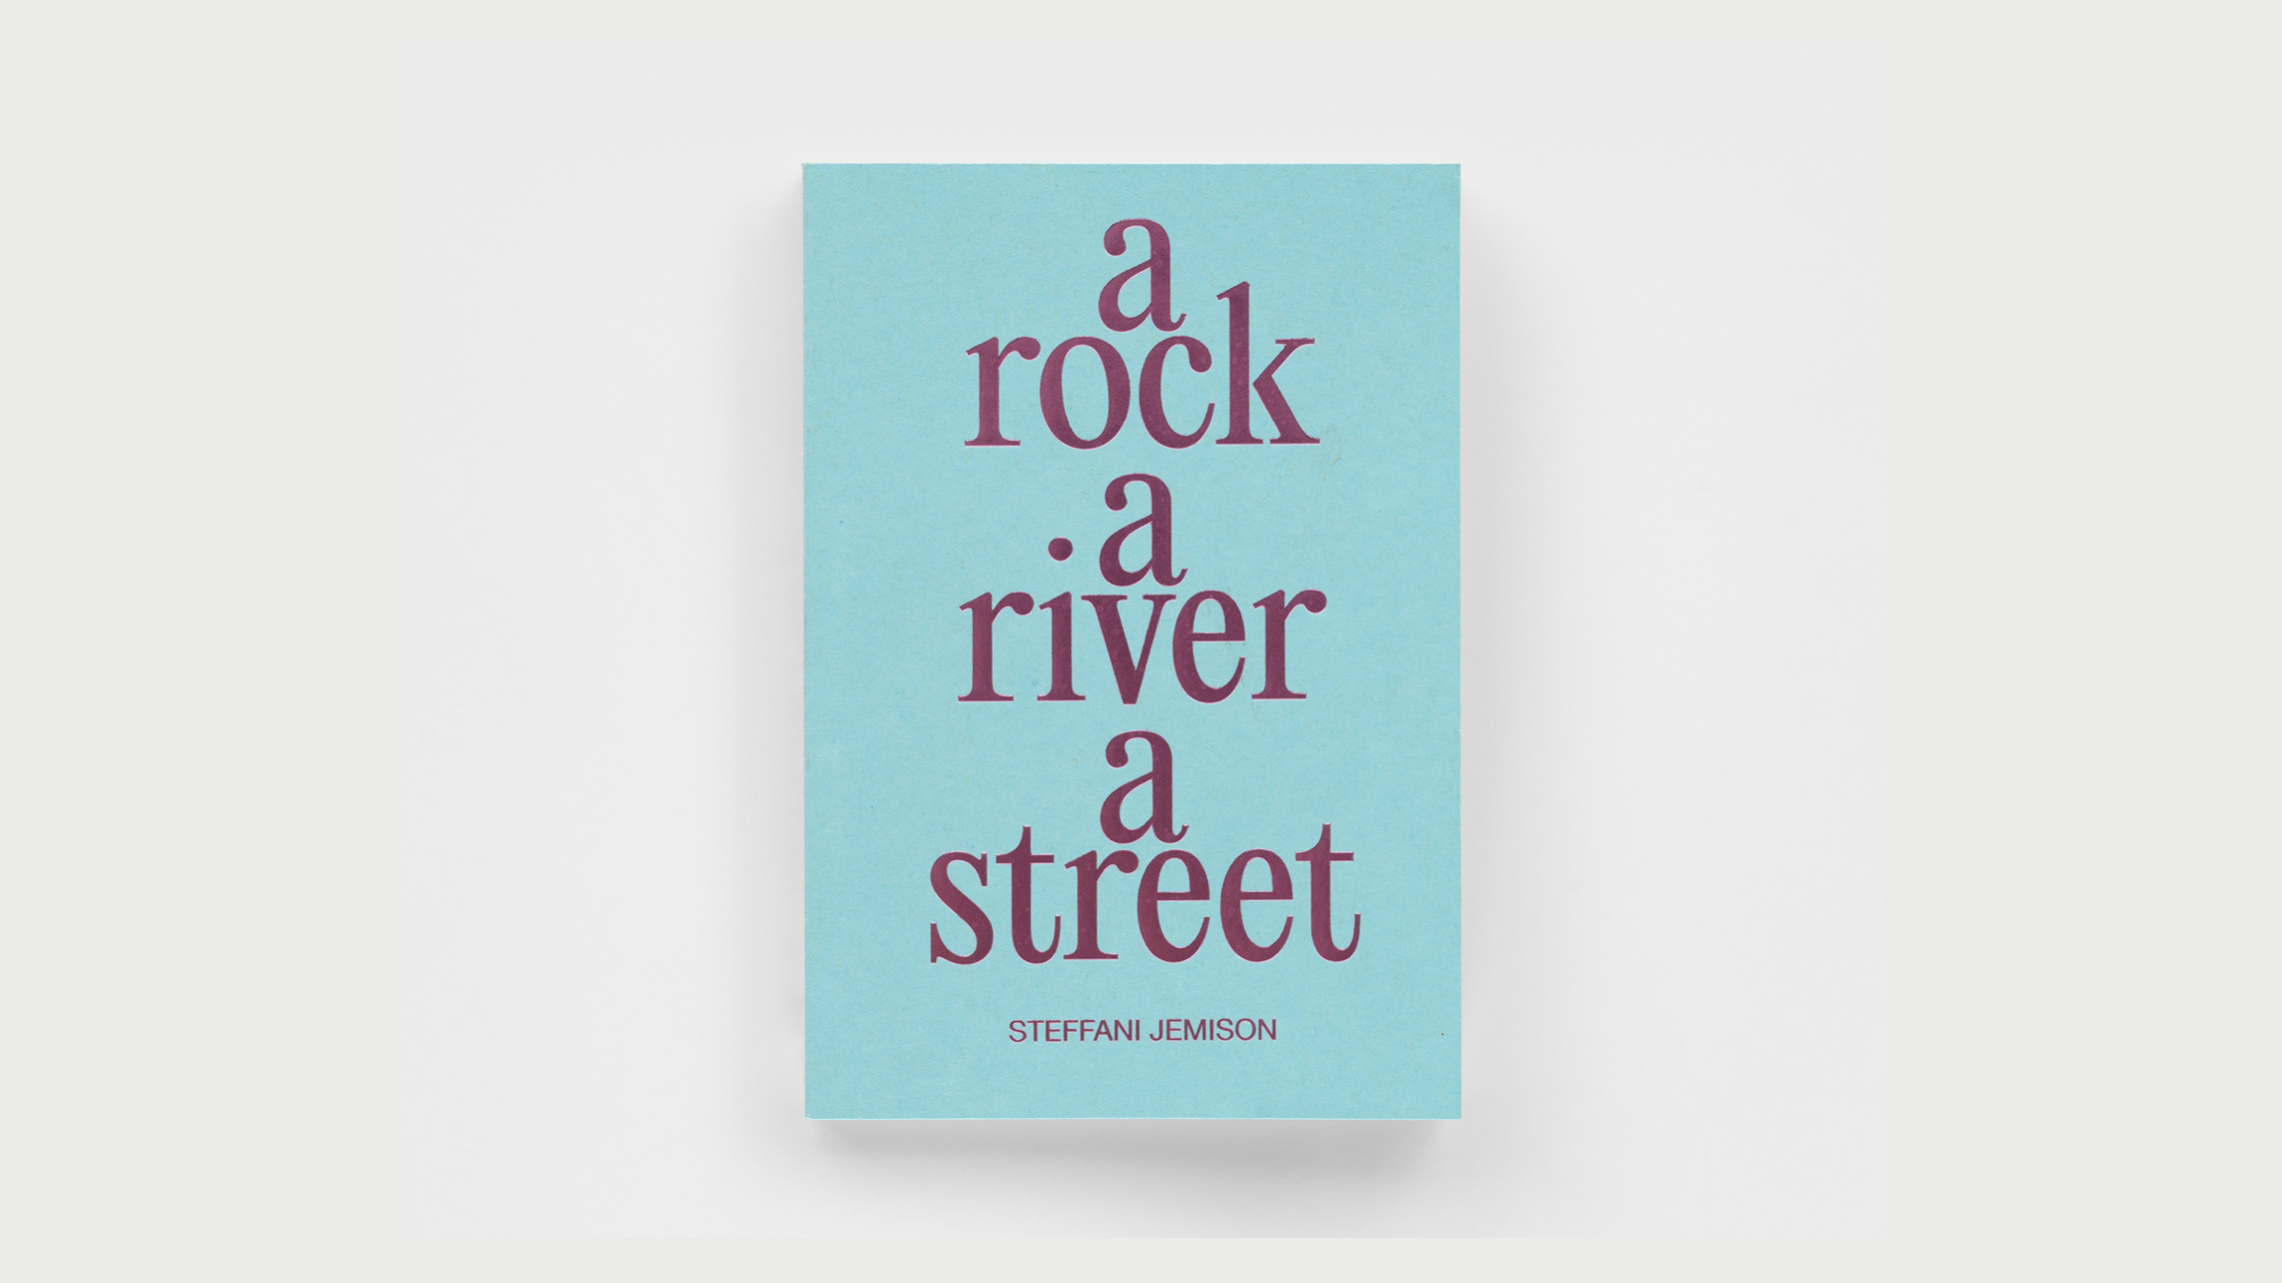 Light blue book cover, with a metallic purple title that reads "a rock, a river, a street" in lowercase. Each word is stacked on top of the other. The author's name, Steffani Jemison, sits below the title in all capital letters.